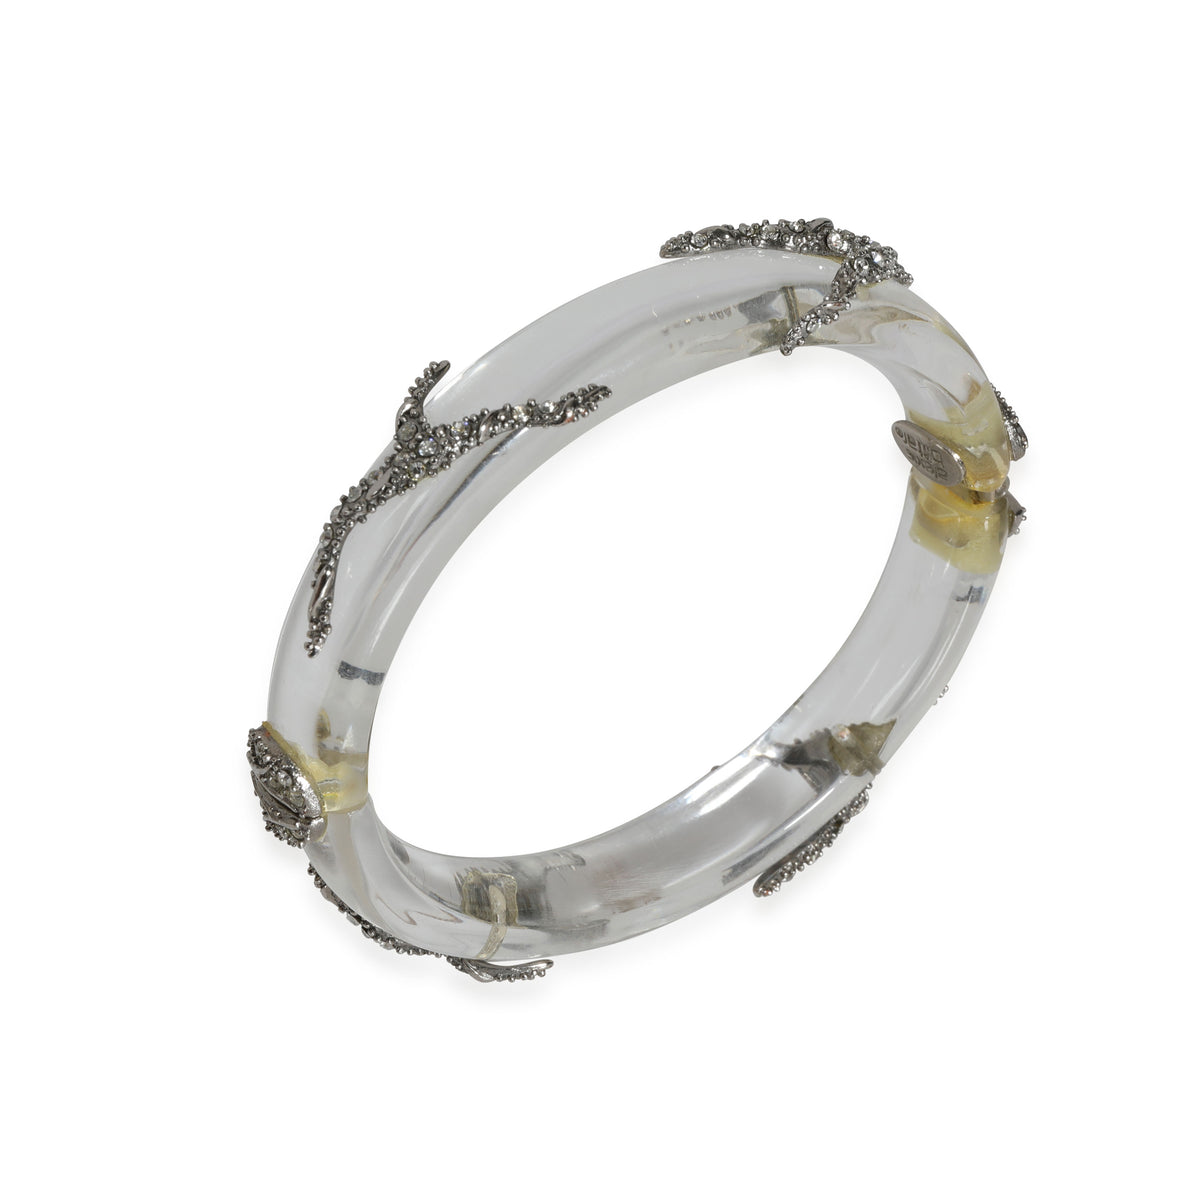 Alexis Bittar 11 1/2 mm Wide Hinged Clear Lucite Bangle